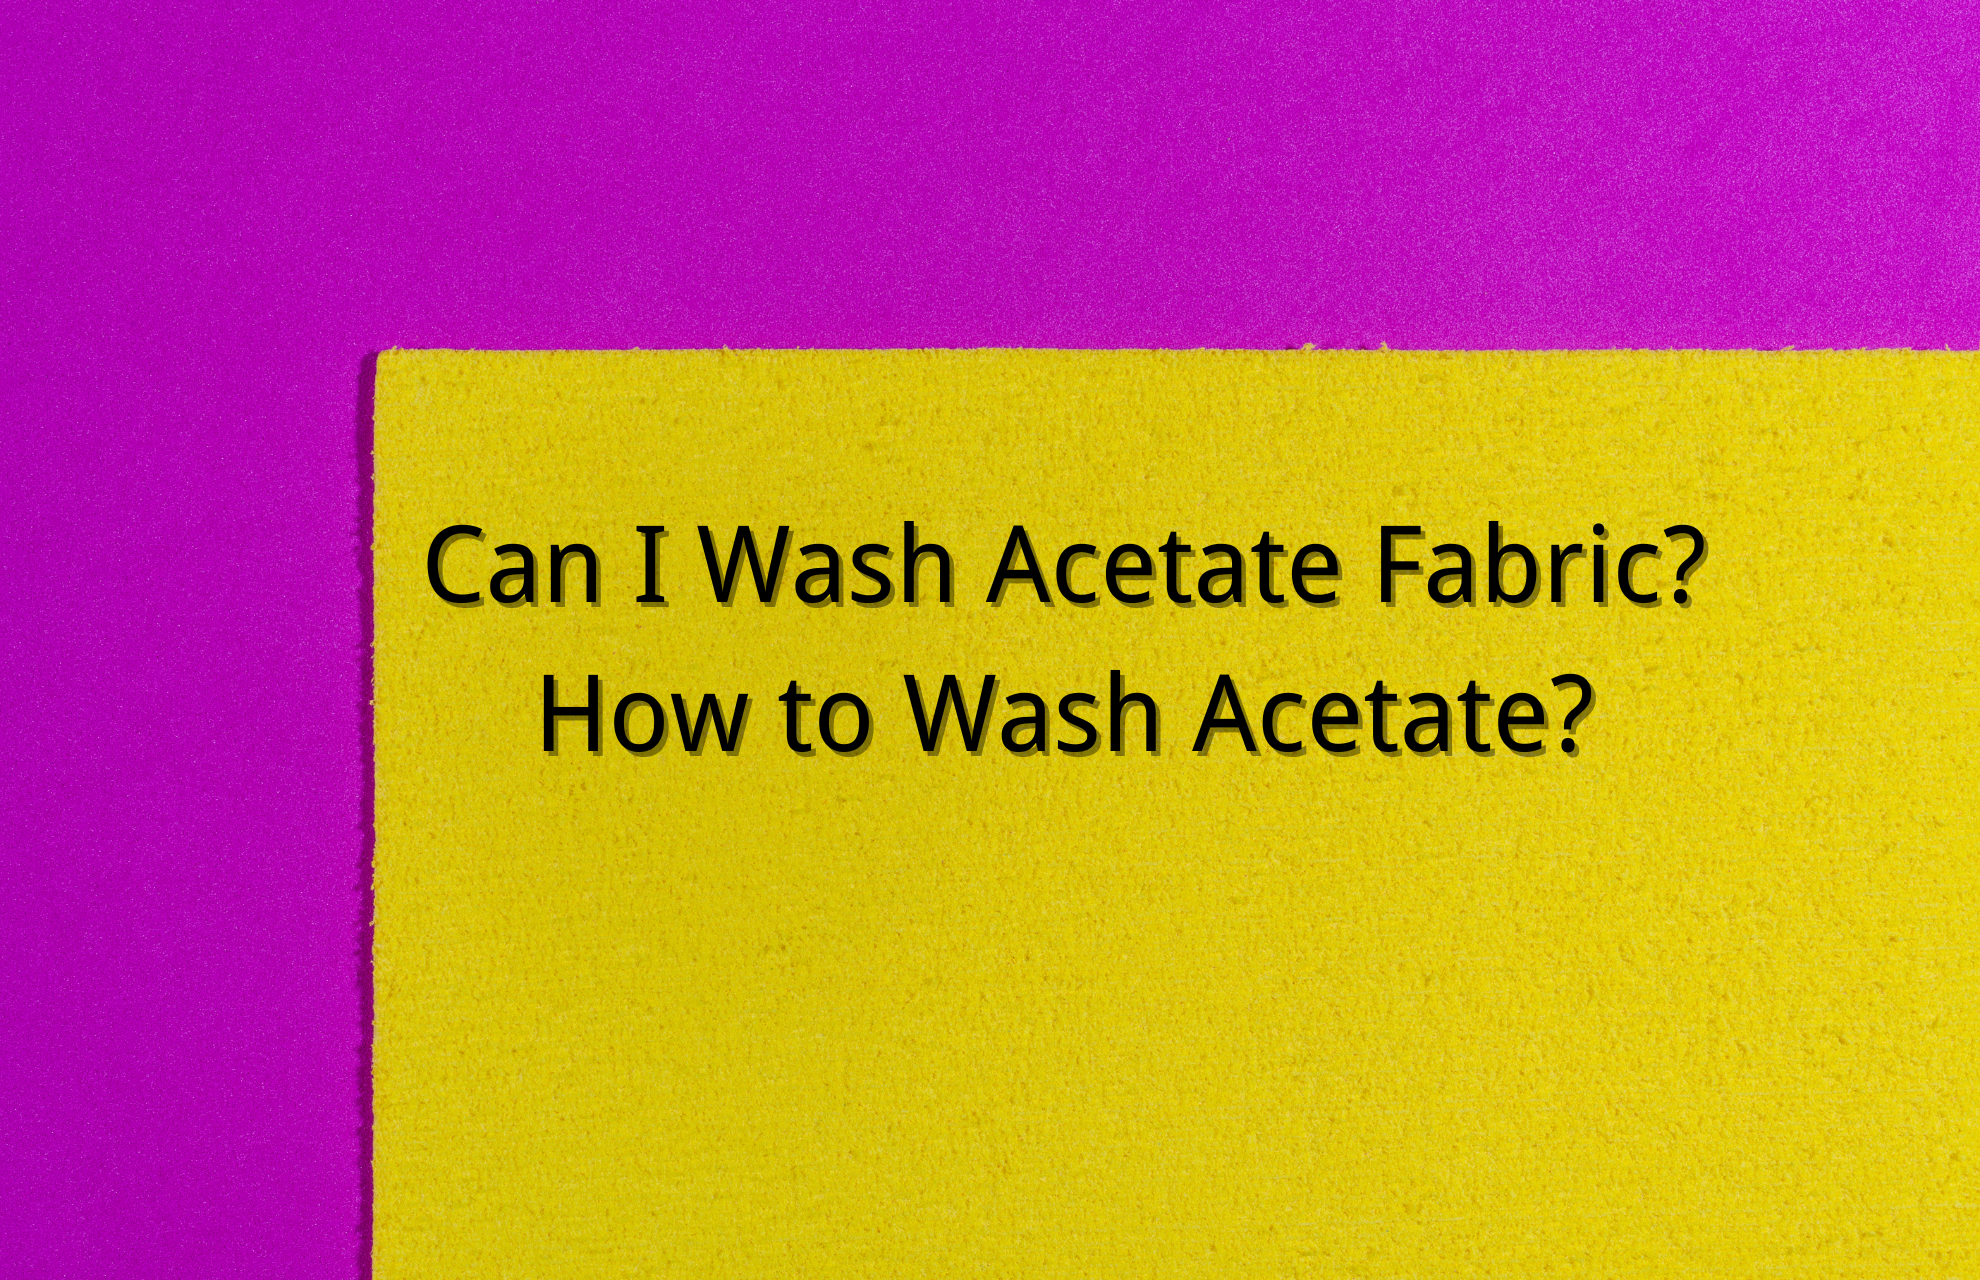 Can I Wash Acetate Fabric? How to Wash Acetate?